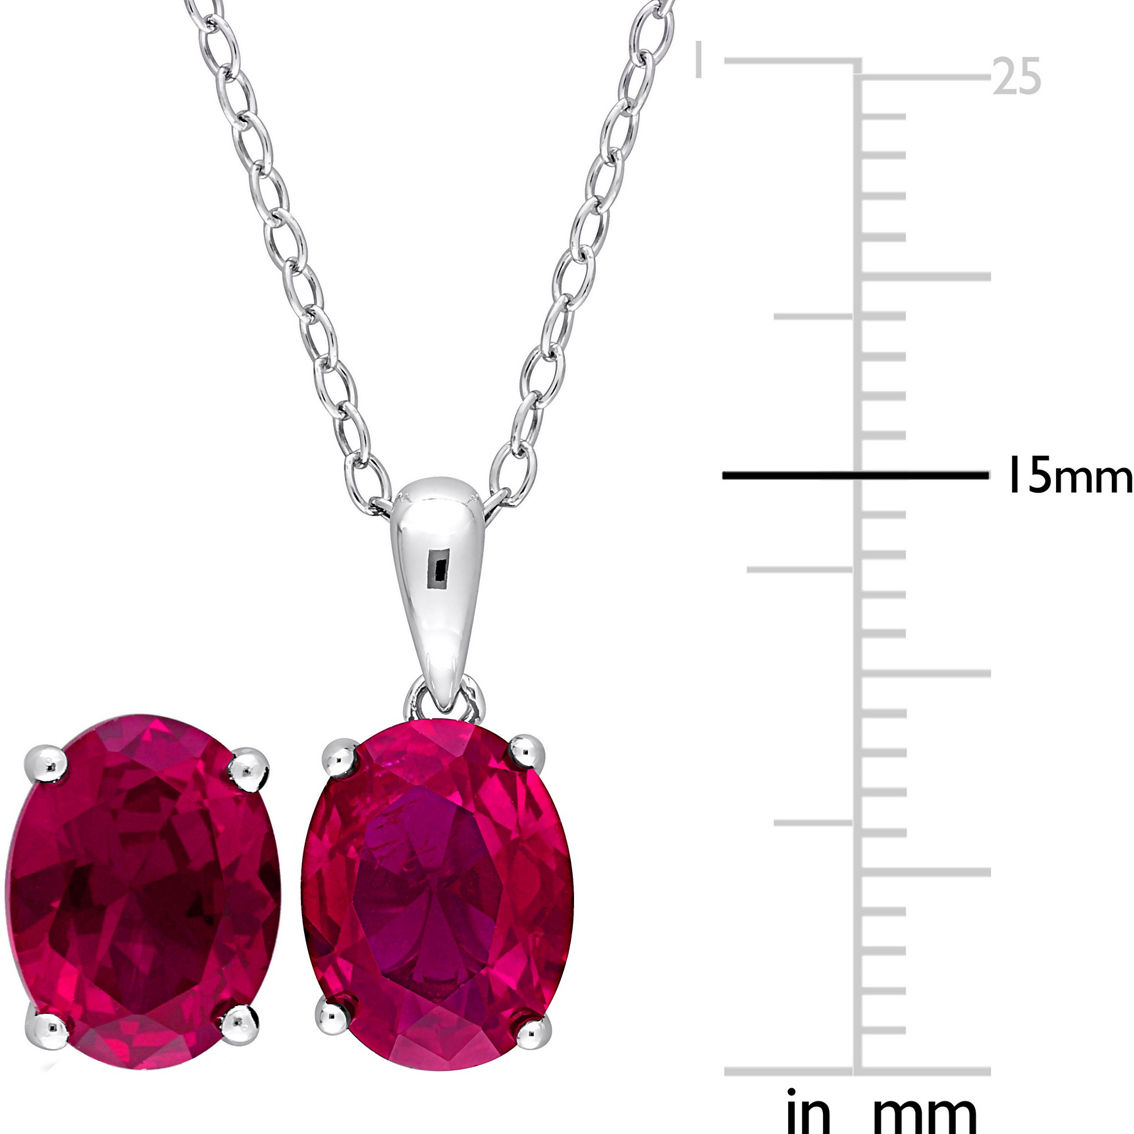 Sofia B. Oval Created Ruby Solitaire Sterling Silver Necklace and Earrings Set - Image 2 of 4